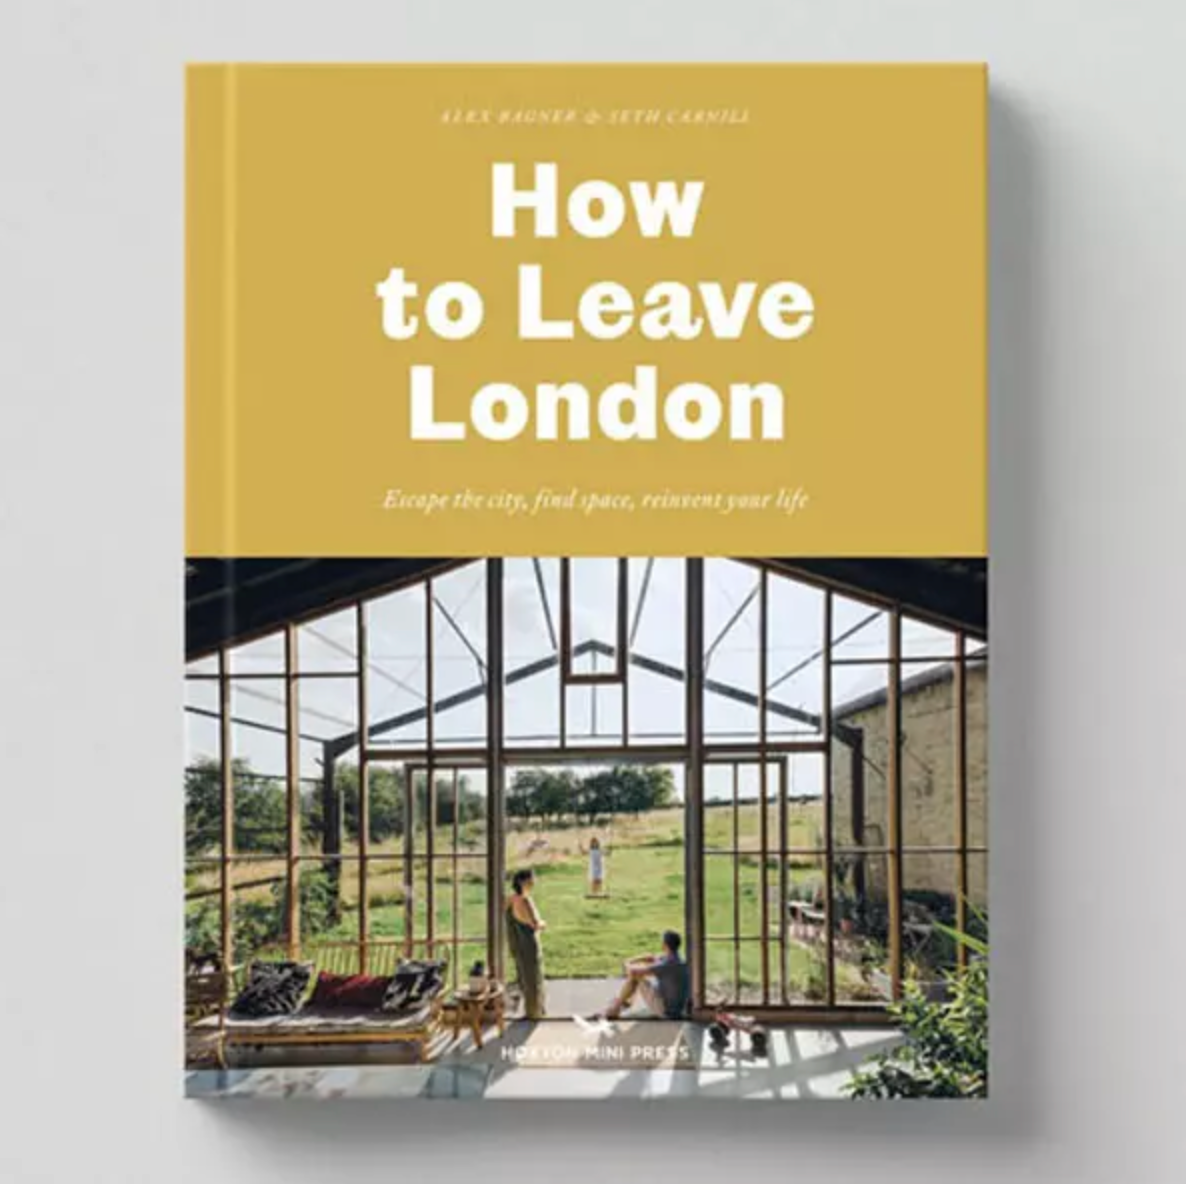 How to Leave London